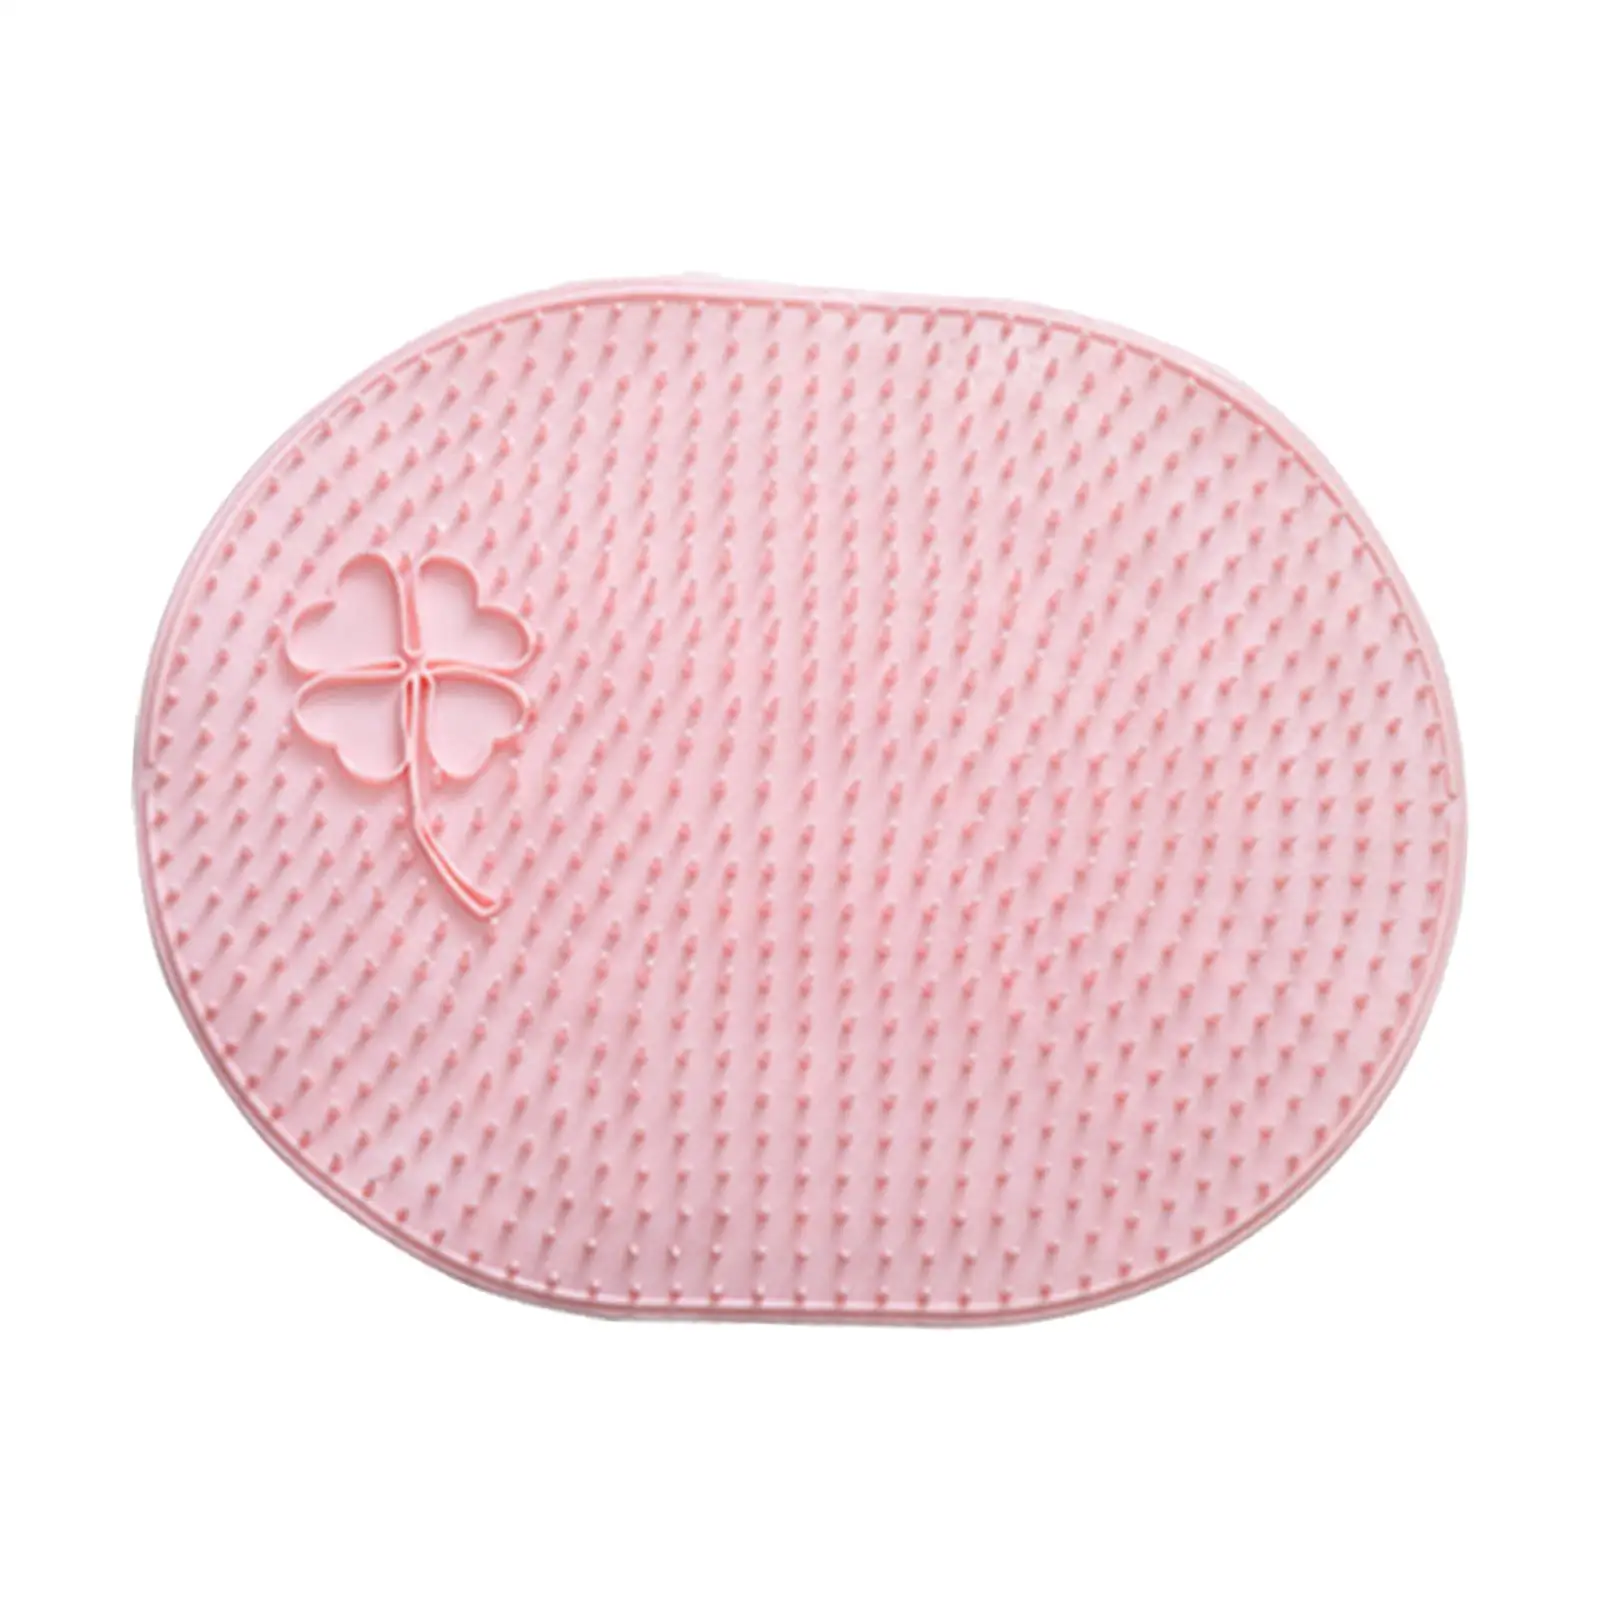 Silicone Shower Foot Scrubber Pad Pink with Suction Cup Accessory Without Bending Over Easily Clean Durable Comfortable